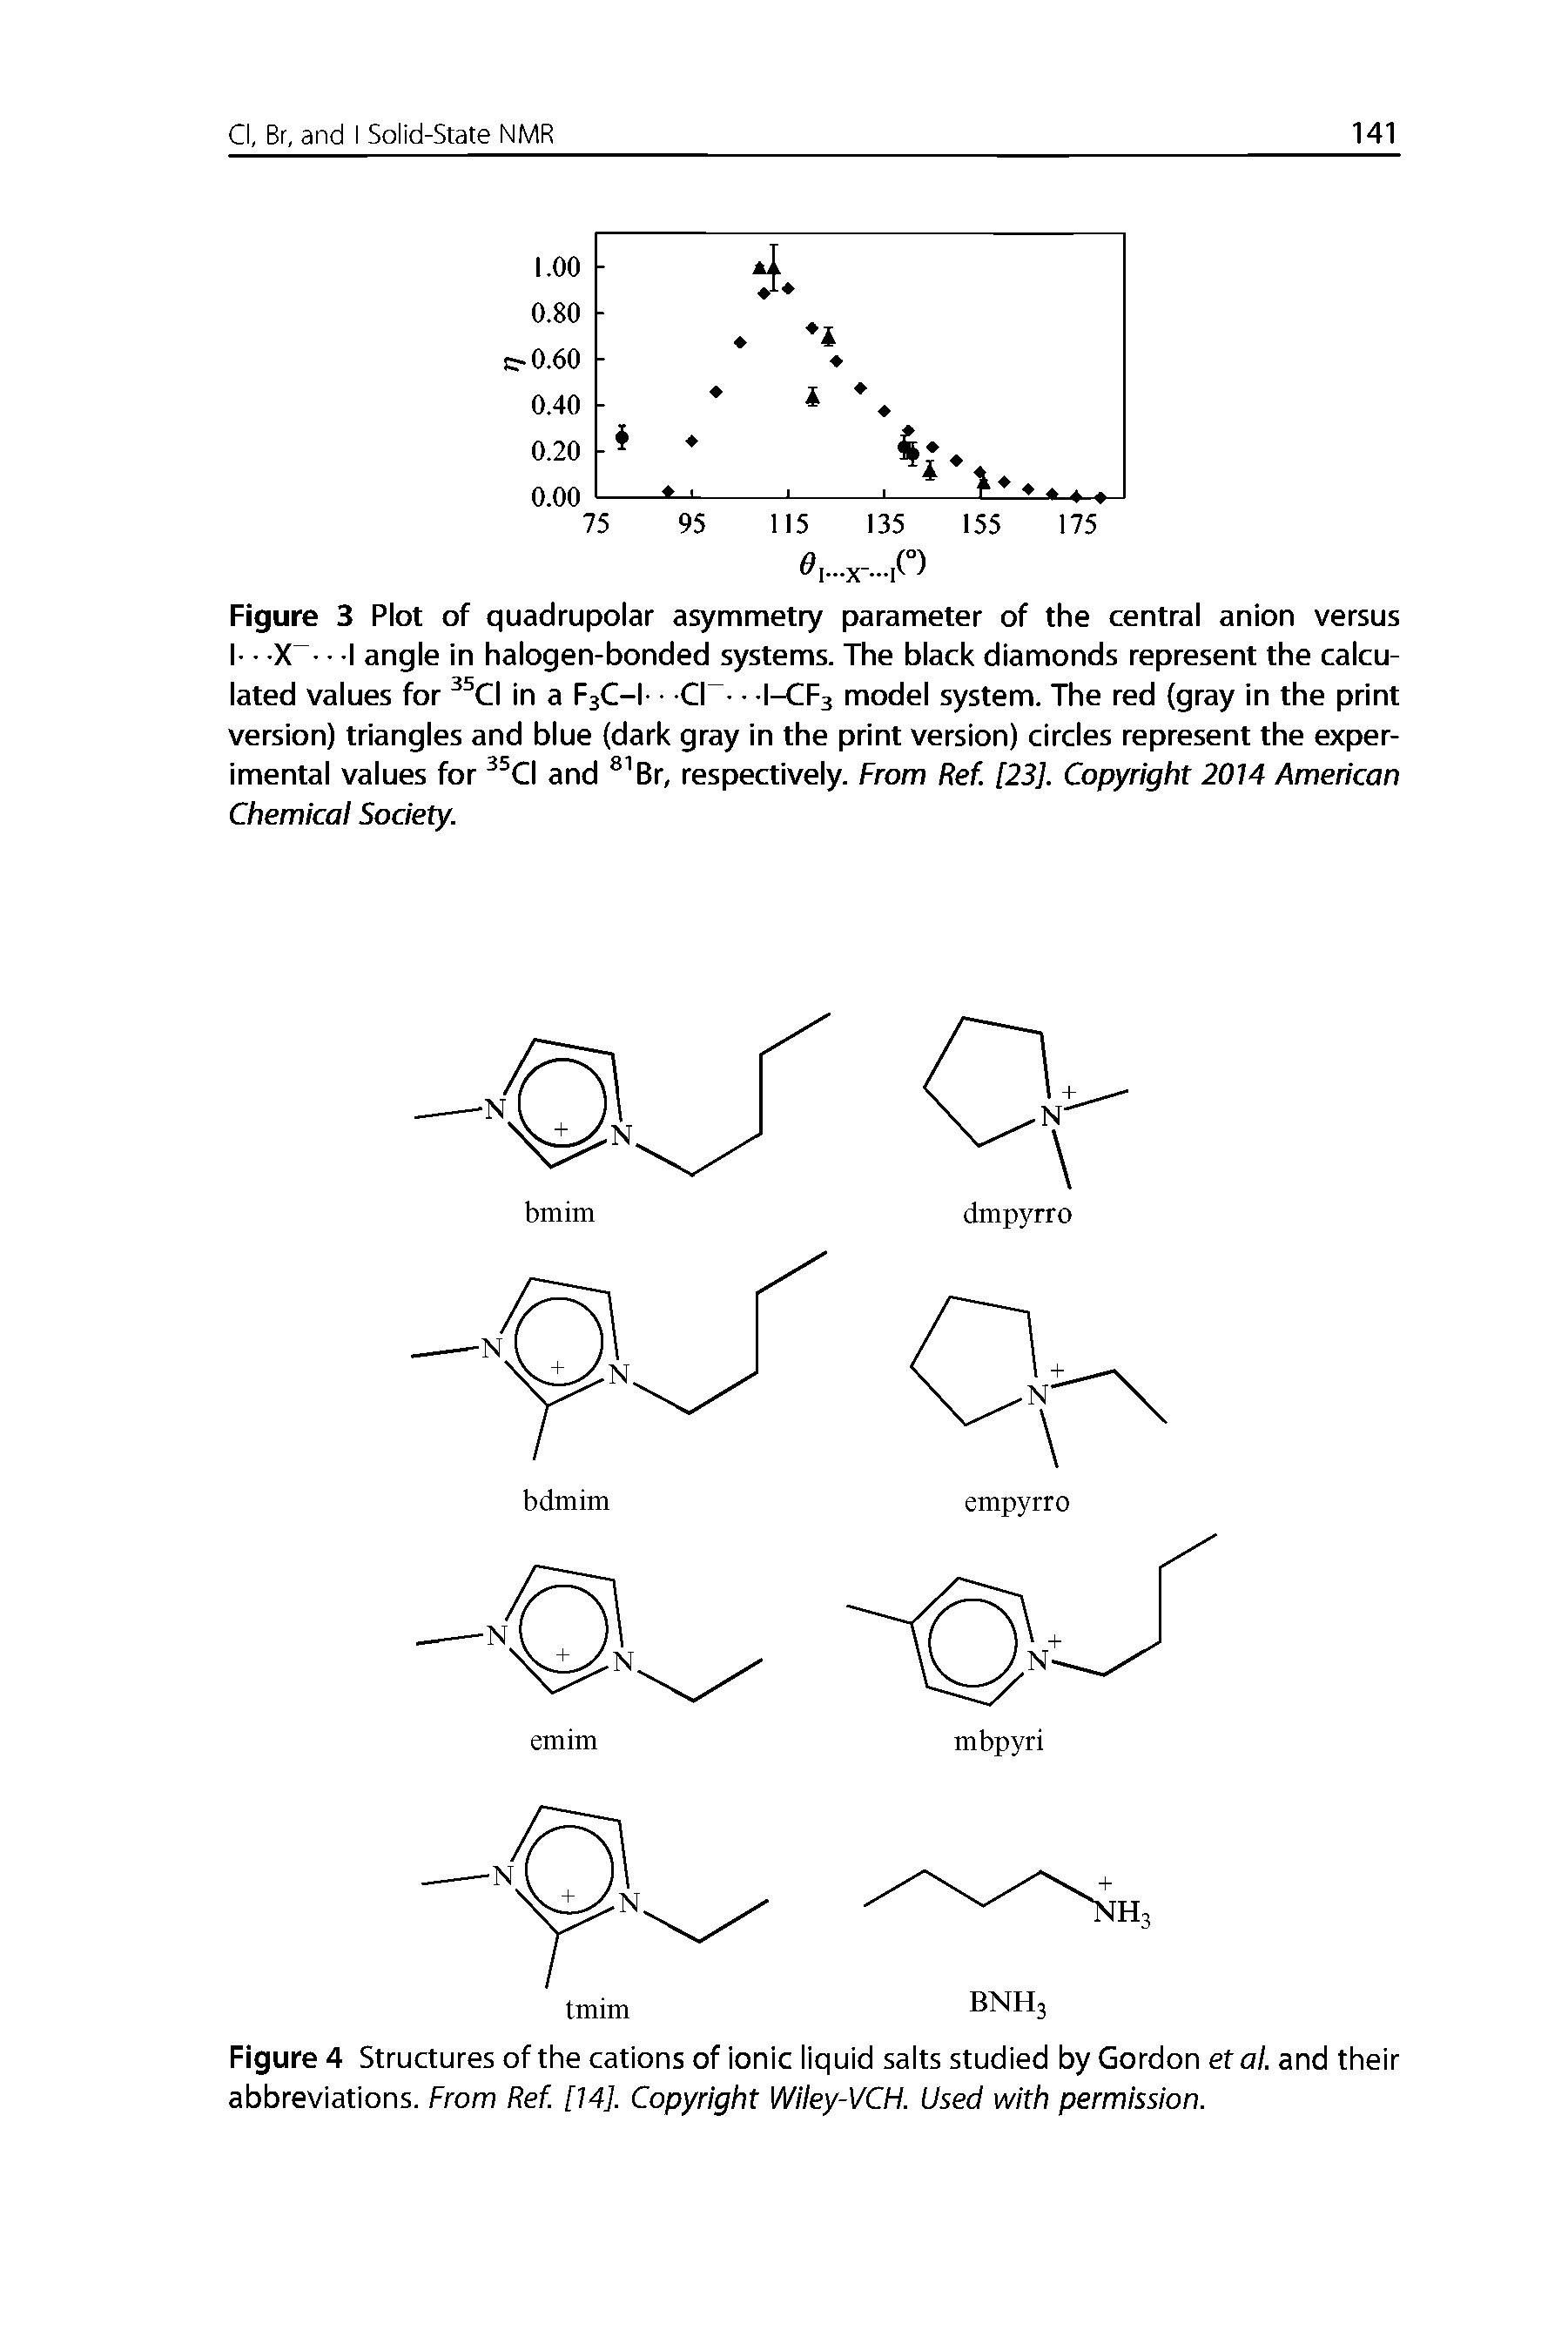 Figure 4 Structures of the cations of ionic liquid salts studied by Gordon etal. and their abbreviations. From Ref [14]. Copyright Wiley-VCH. Used with permission.